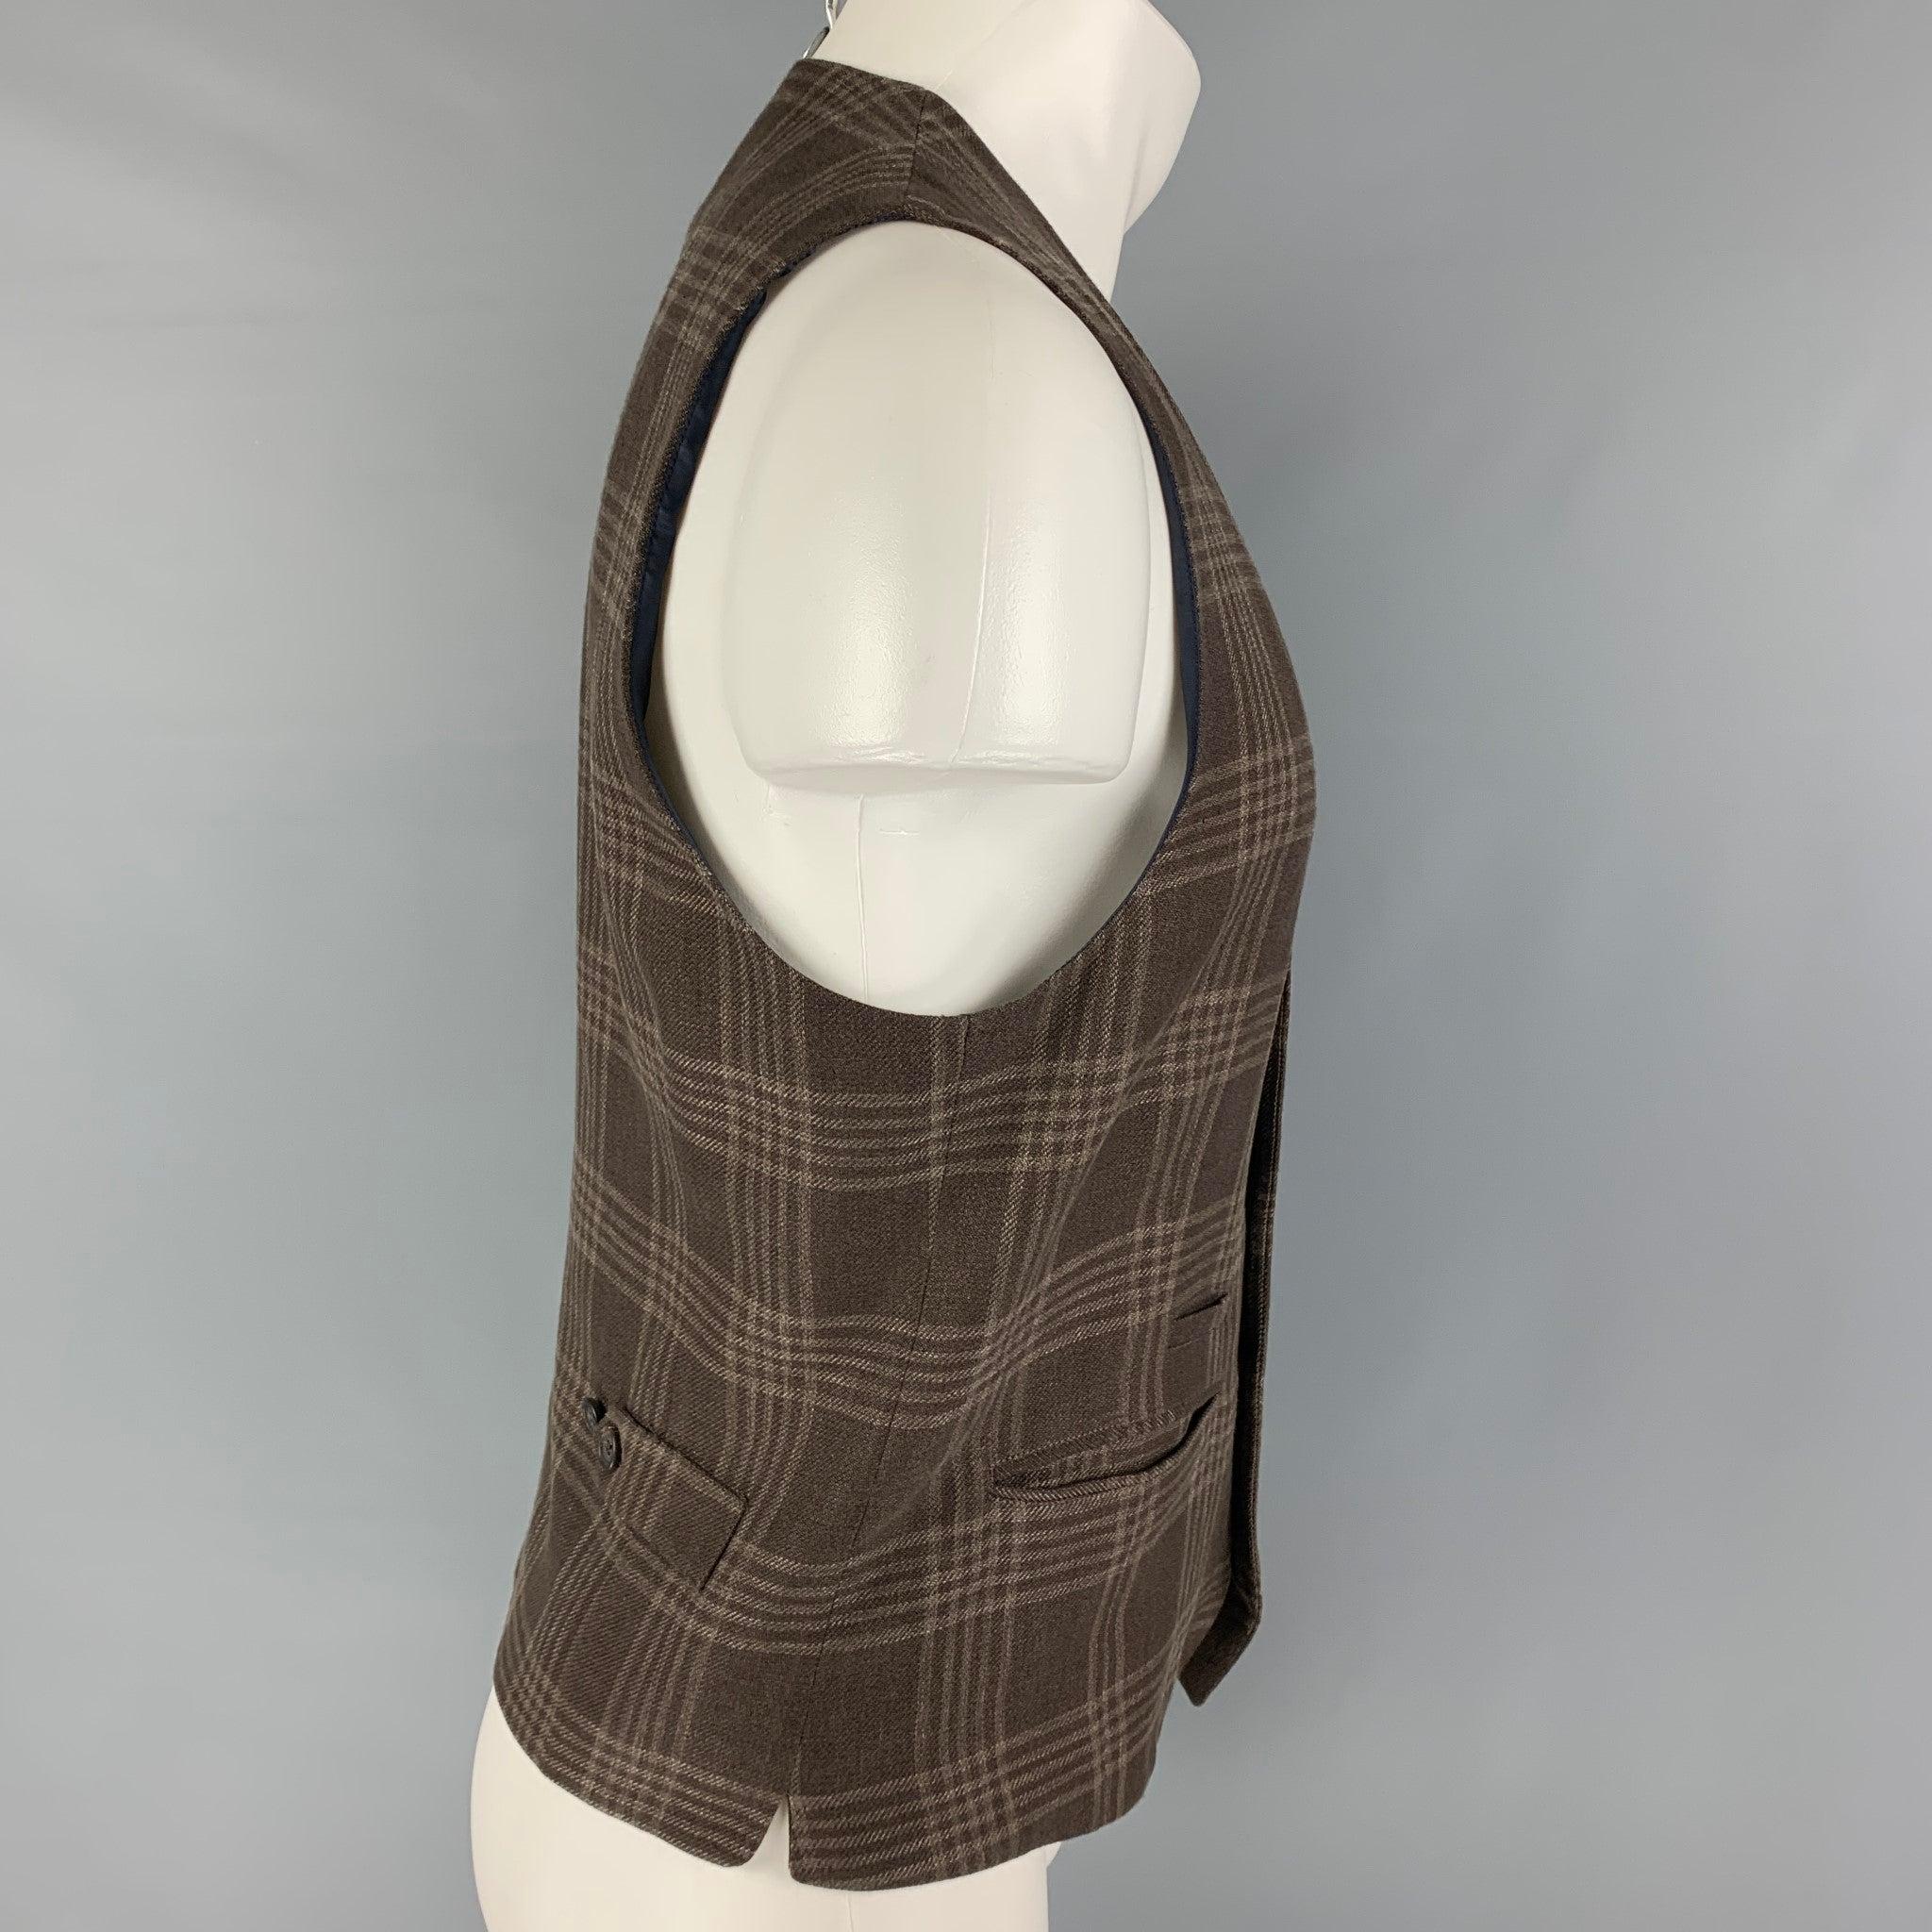 BRUNELLO CUCINELLI vest comes in a brown plaid linen blend featuring slit pocket, side tabs, and a buttoned closure. Made in Italy.
Excellent
Pre-Owned Condition. 

Marked:   50 

Measurements: 
 
Shoulder: 14 inches Chest: 38 inches Length: 23